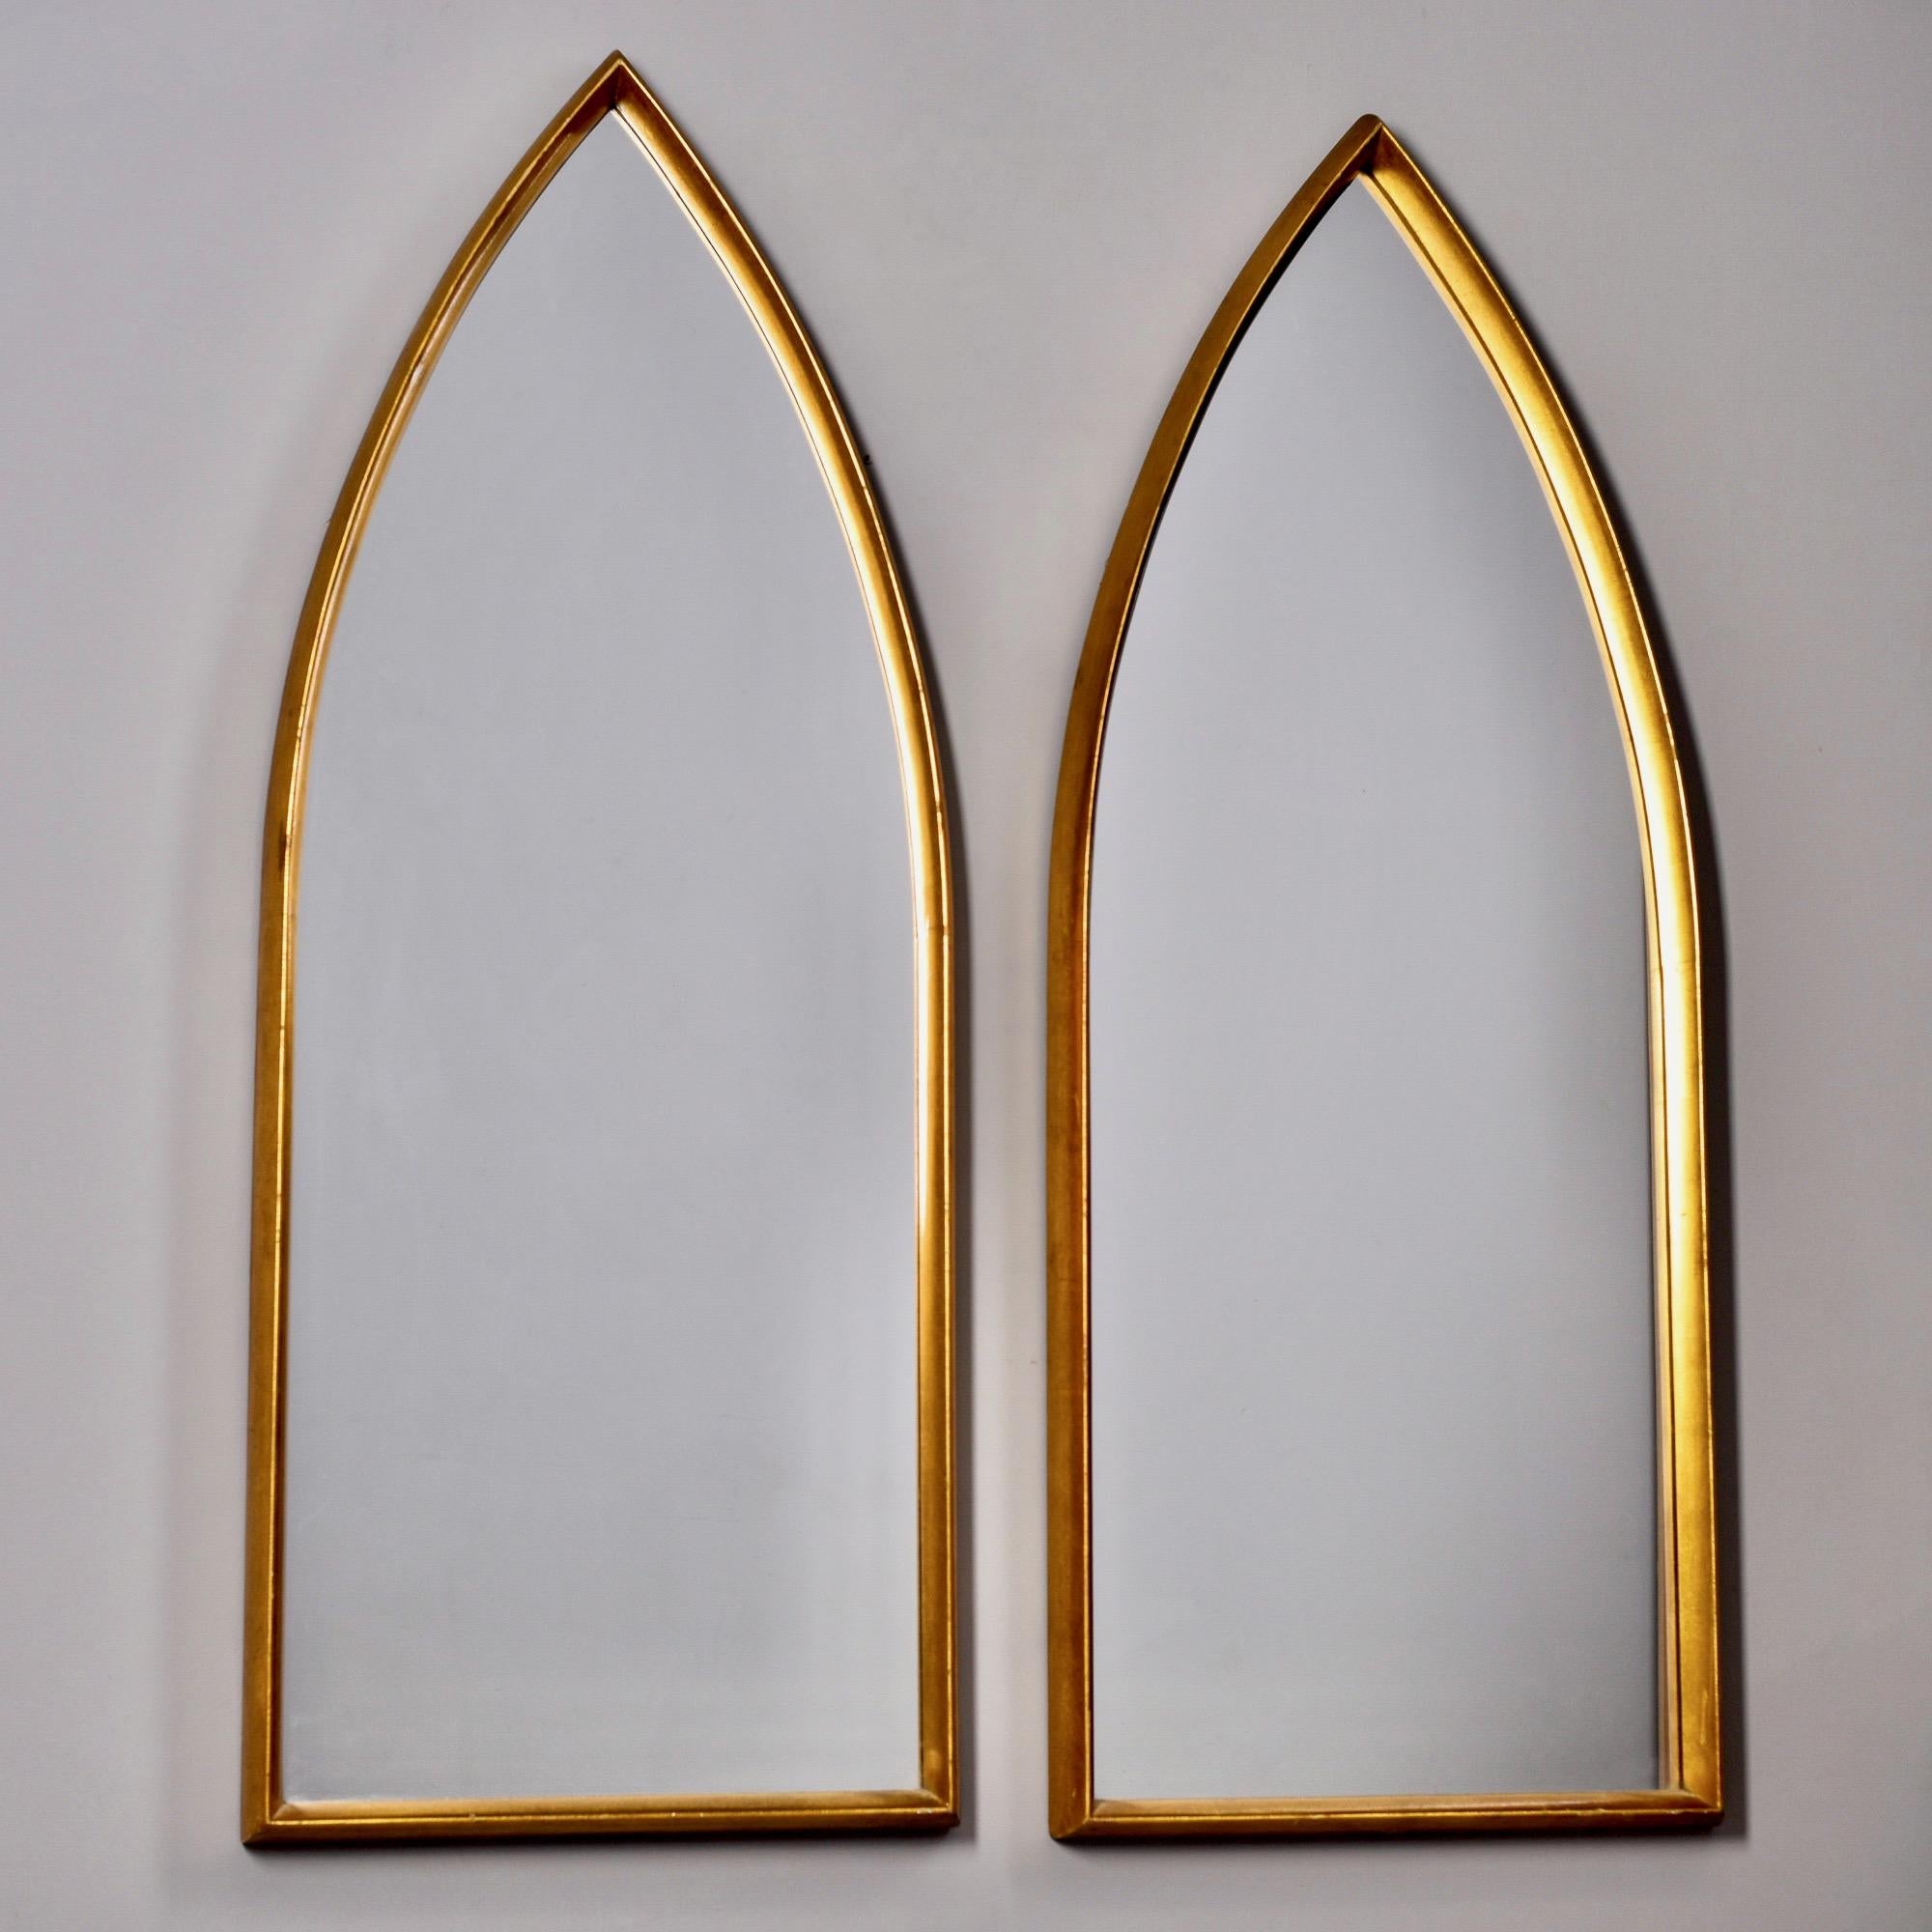 Found in the US, this pair of giltwood cathedral style mirrors are mounted in deep set frames. Unknown maker. Frames have some scattered surface wear and nicks but are in overall very good vintage condition. Sold and priced as a pair. 

Actual